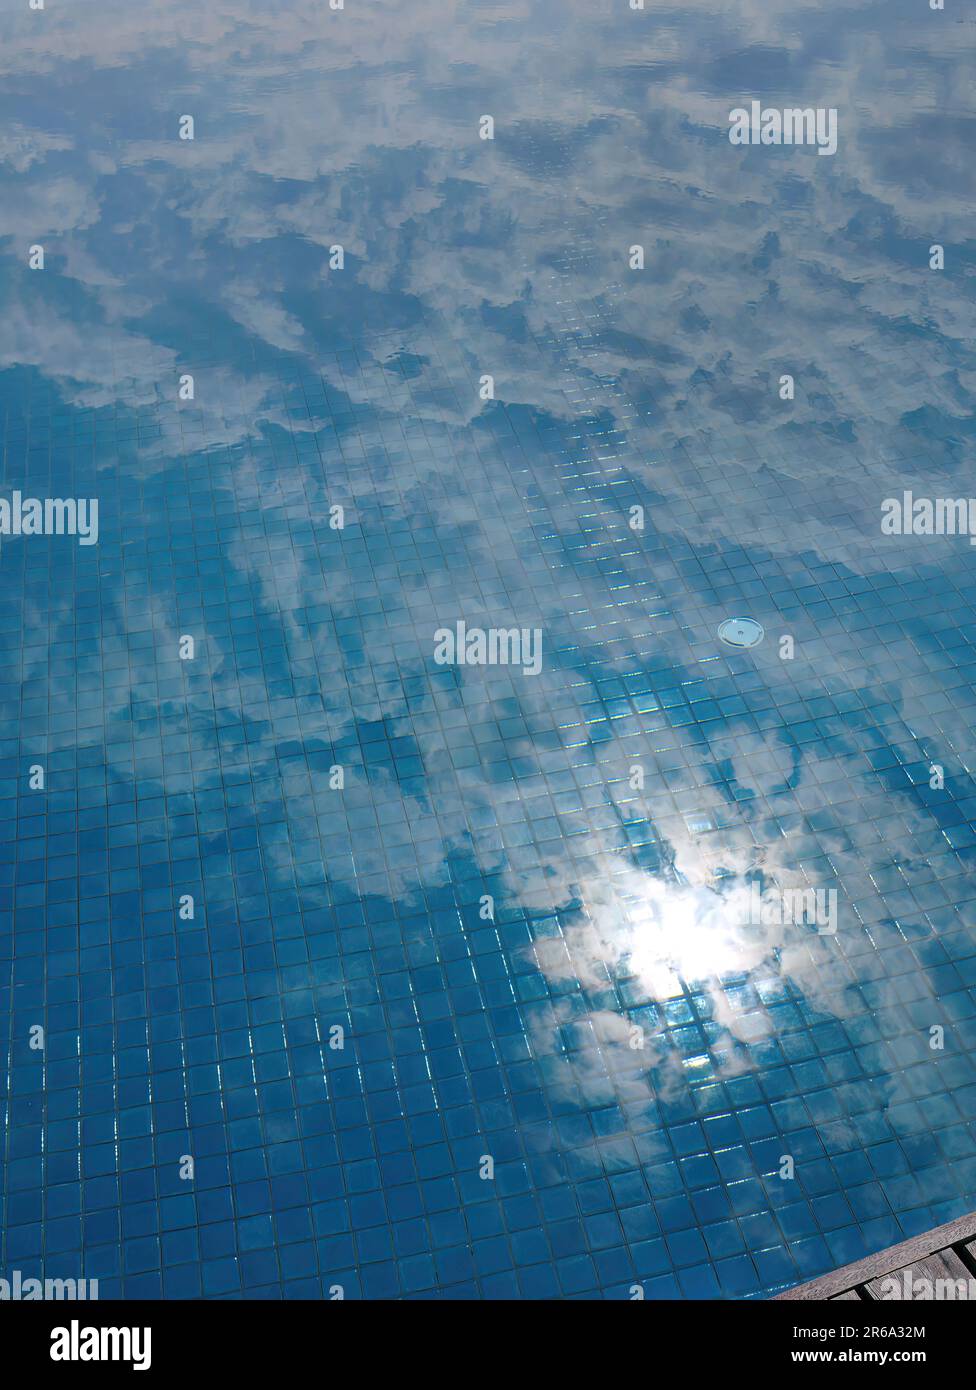 Mirror reflection of the sun, blue sky and clouds in the swimming pool, ceramic tiles texture, clear water, reflected, picture in the water, abstract Stock Photo